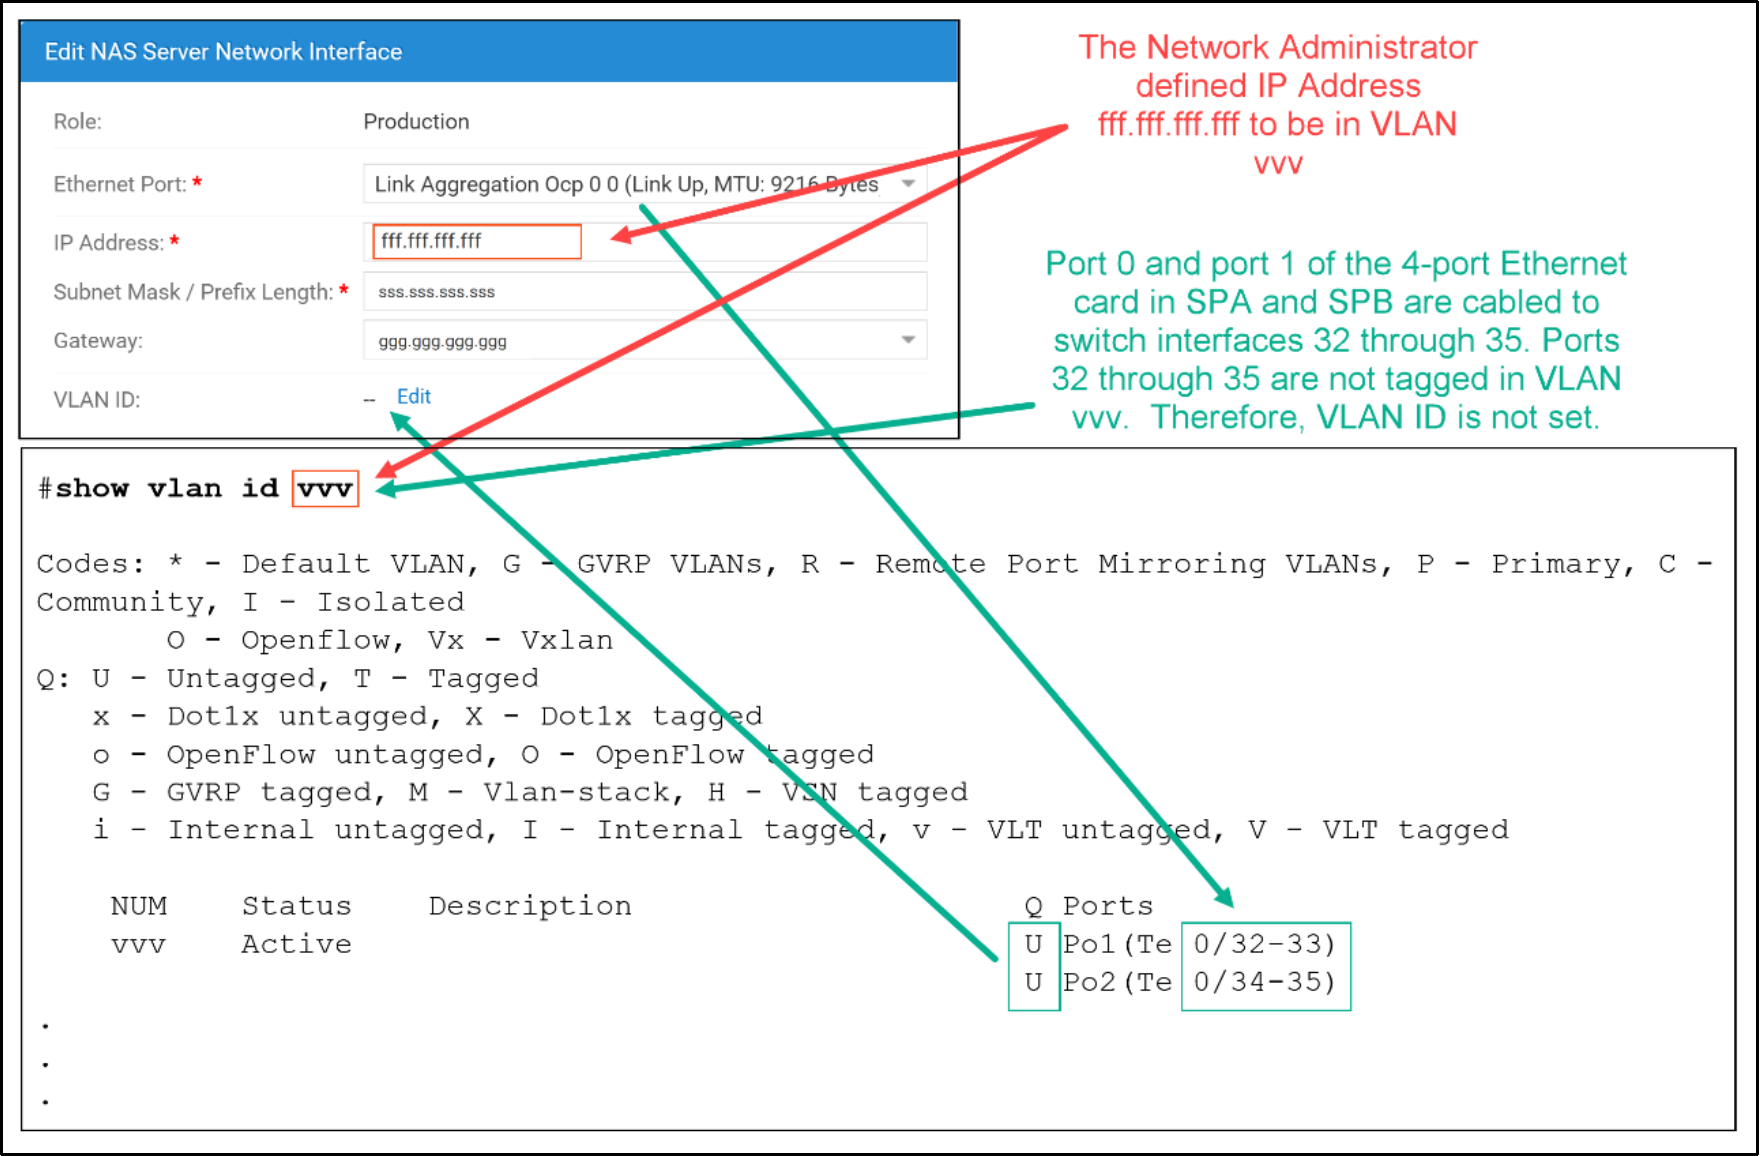 This diagram shows an unconfigured VLAN ID in the second step of the  "Create a NAS Server" wizard. The diagram also shows the configuration of Ethernet switch interface which are cabled to the NAS network being defined in the wizard. The key take away is that since VLAN ID is not configured in the wizard, the Ethernet switch interfaces cabled to the NAS network must be untagged, even if they belong to a VLAN ID.